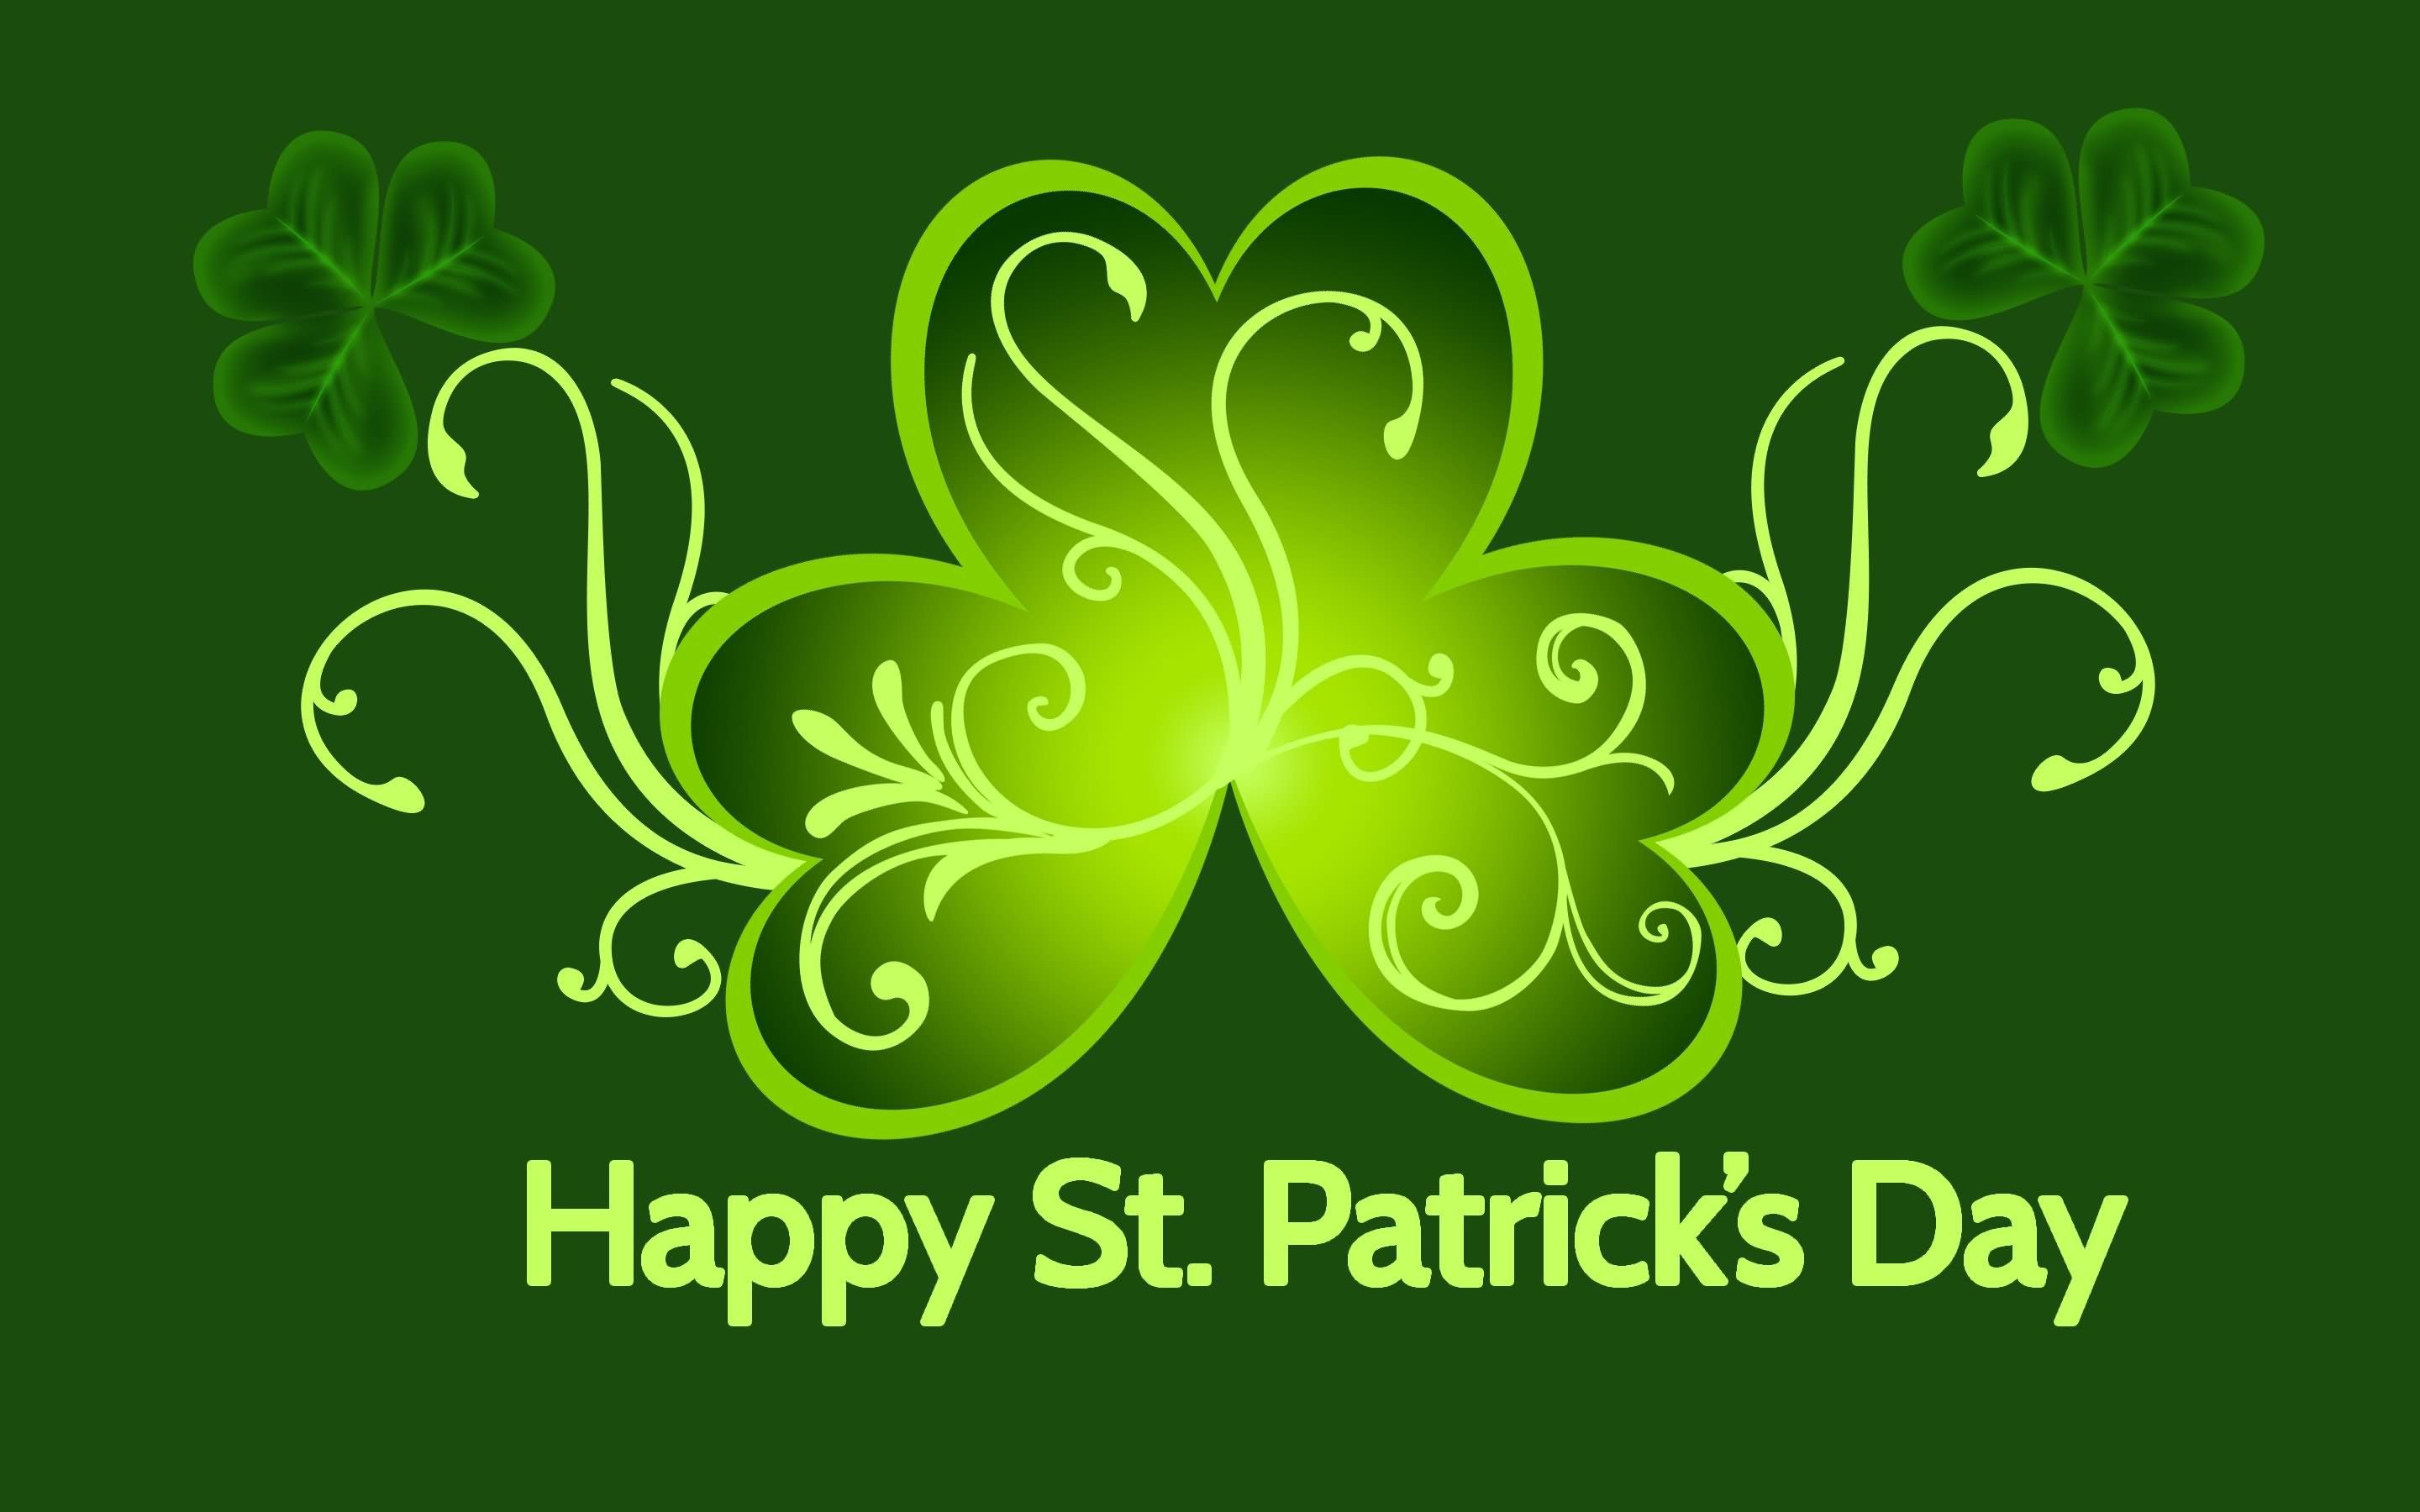 Free* Happy St Patricks Day Image 2021 .ieasterimages.com